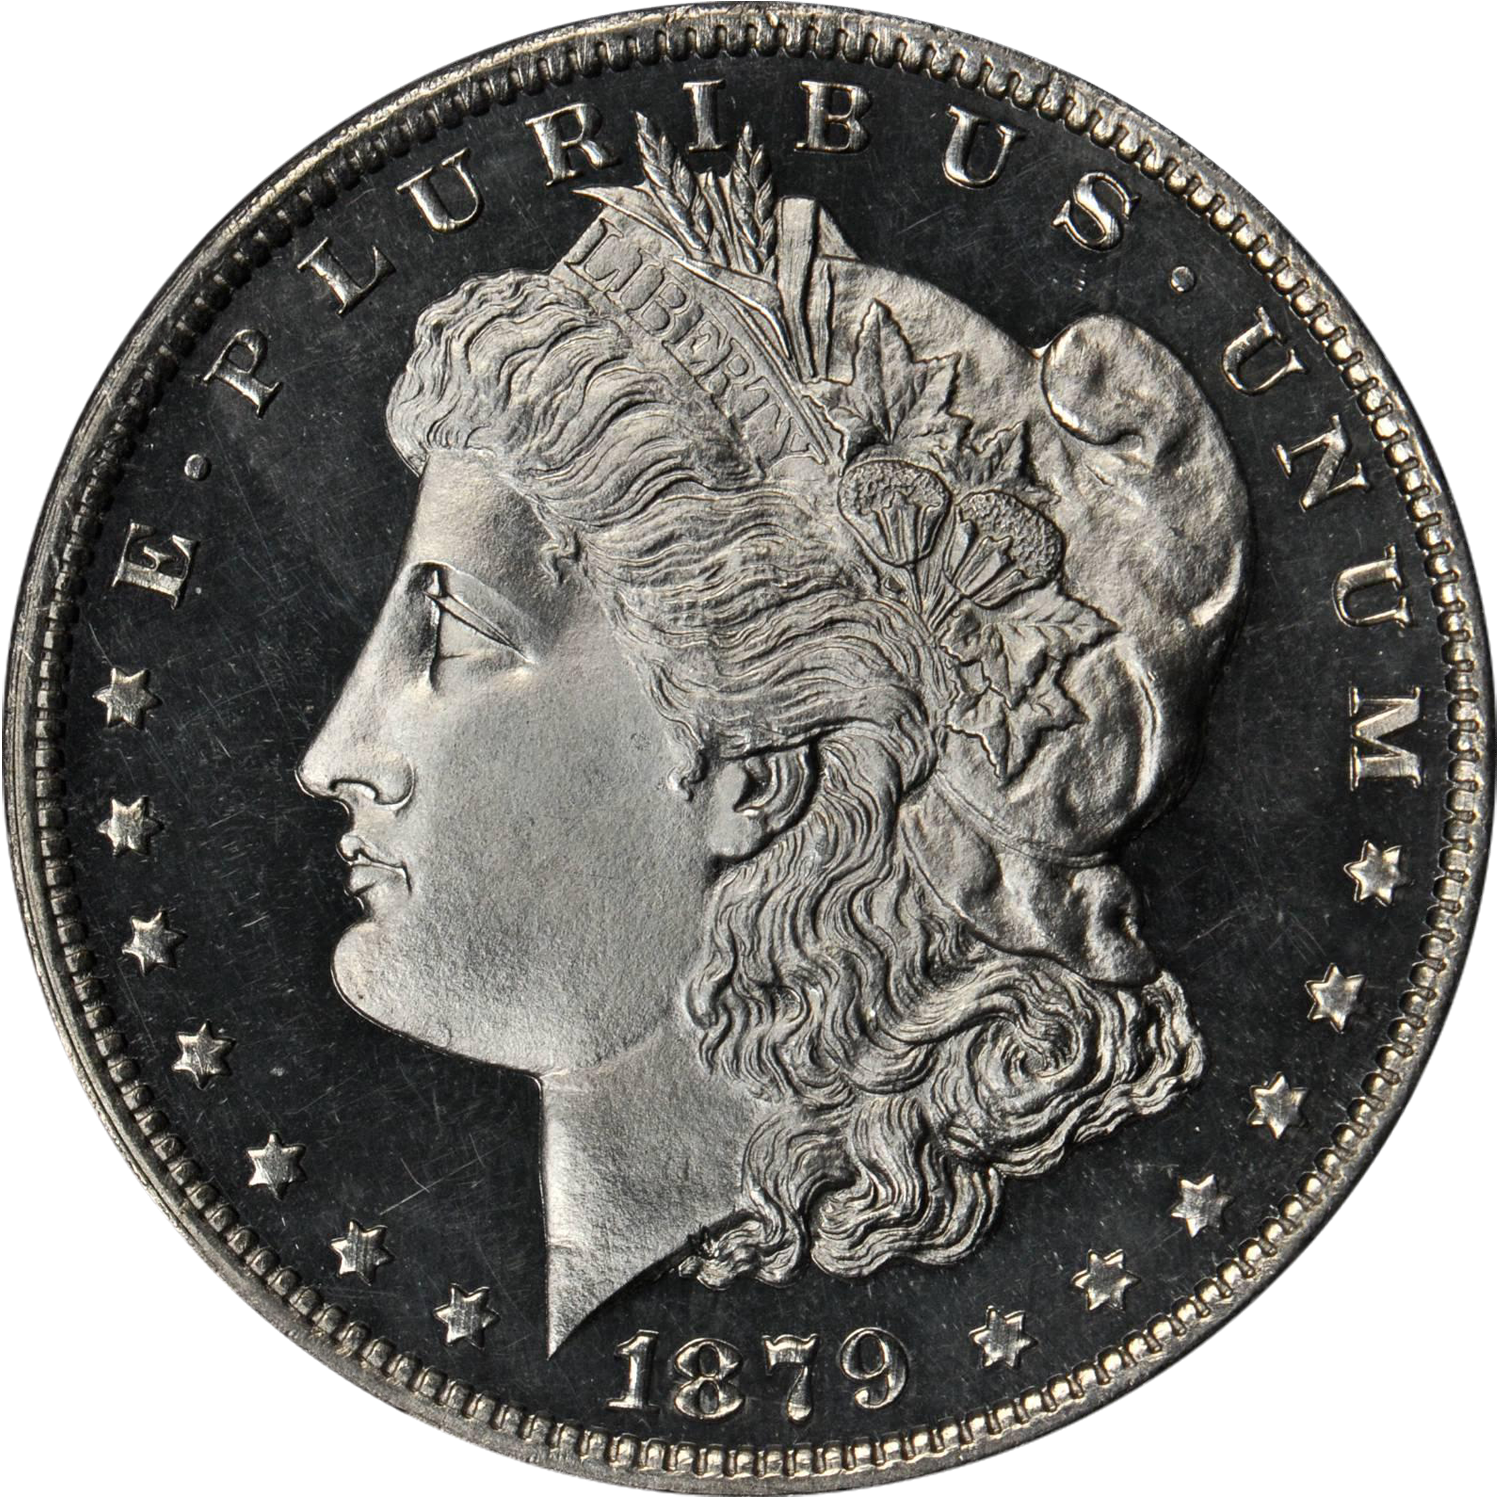 1879 new orleans proof morgan dollar price guide value